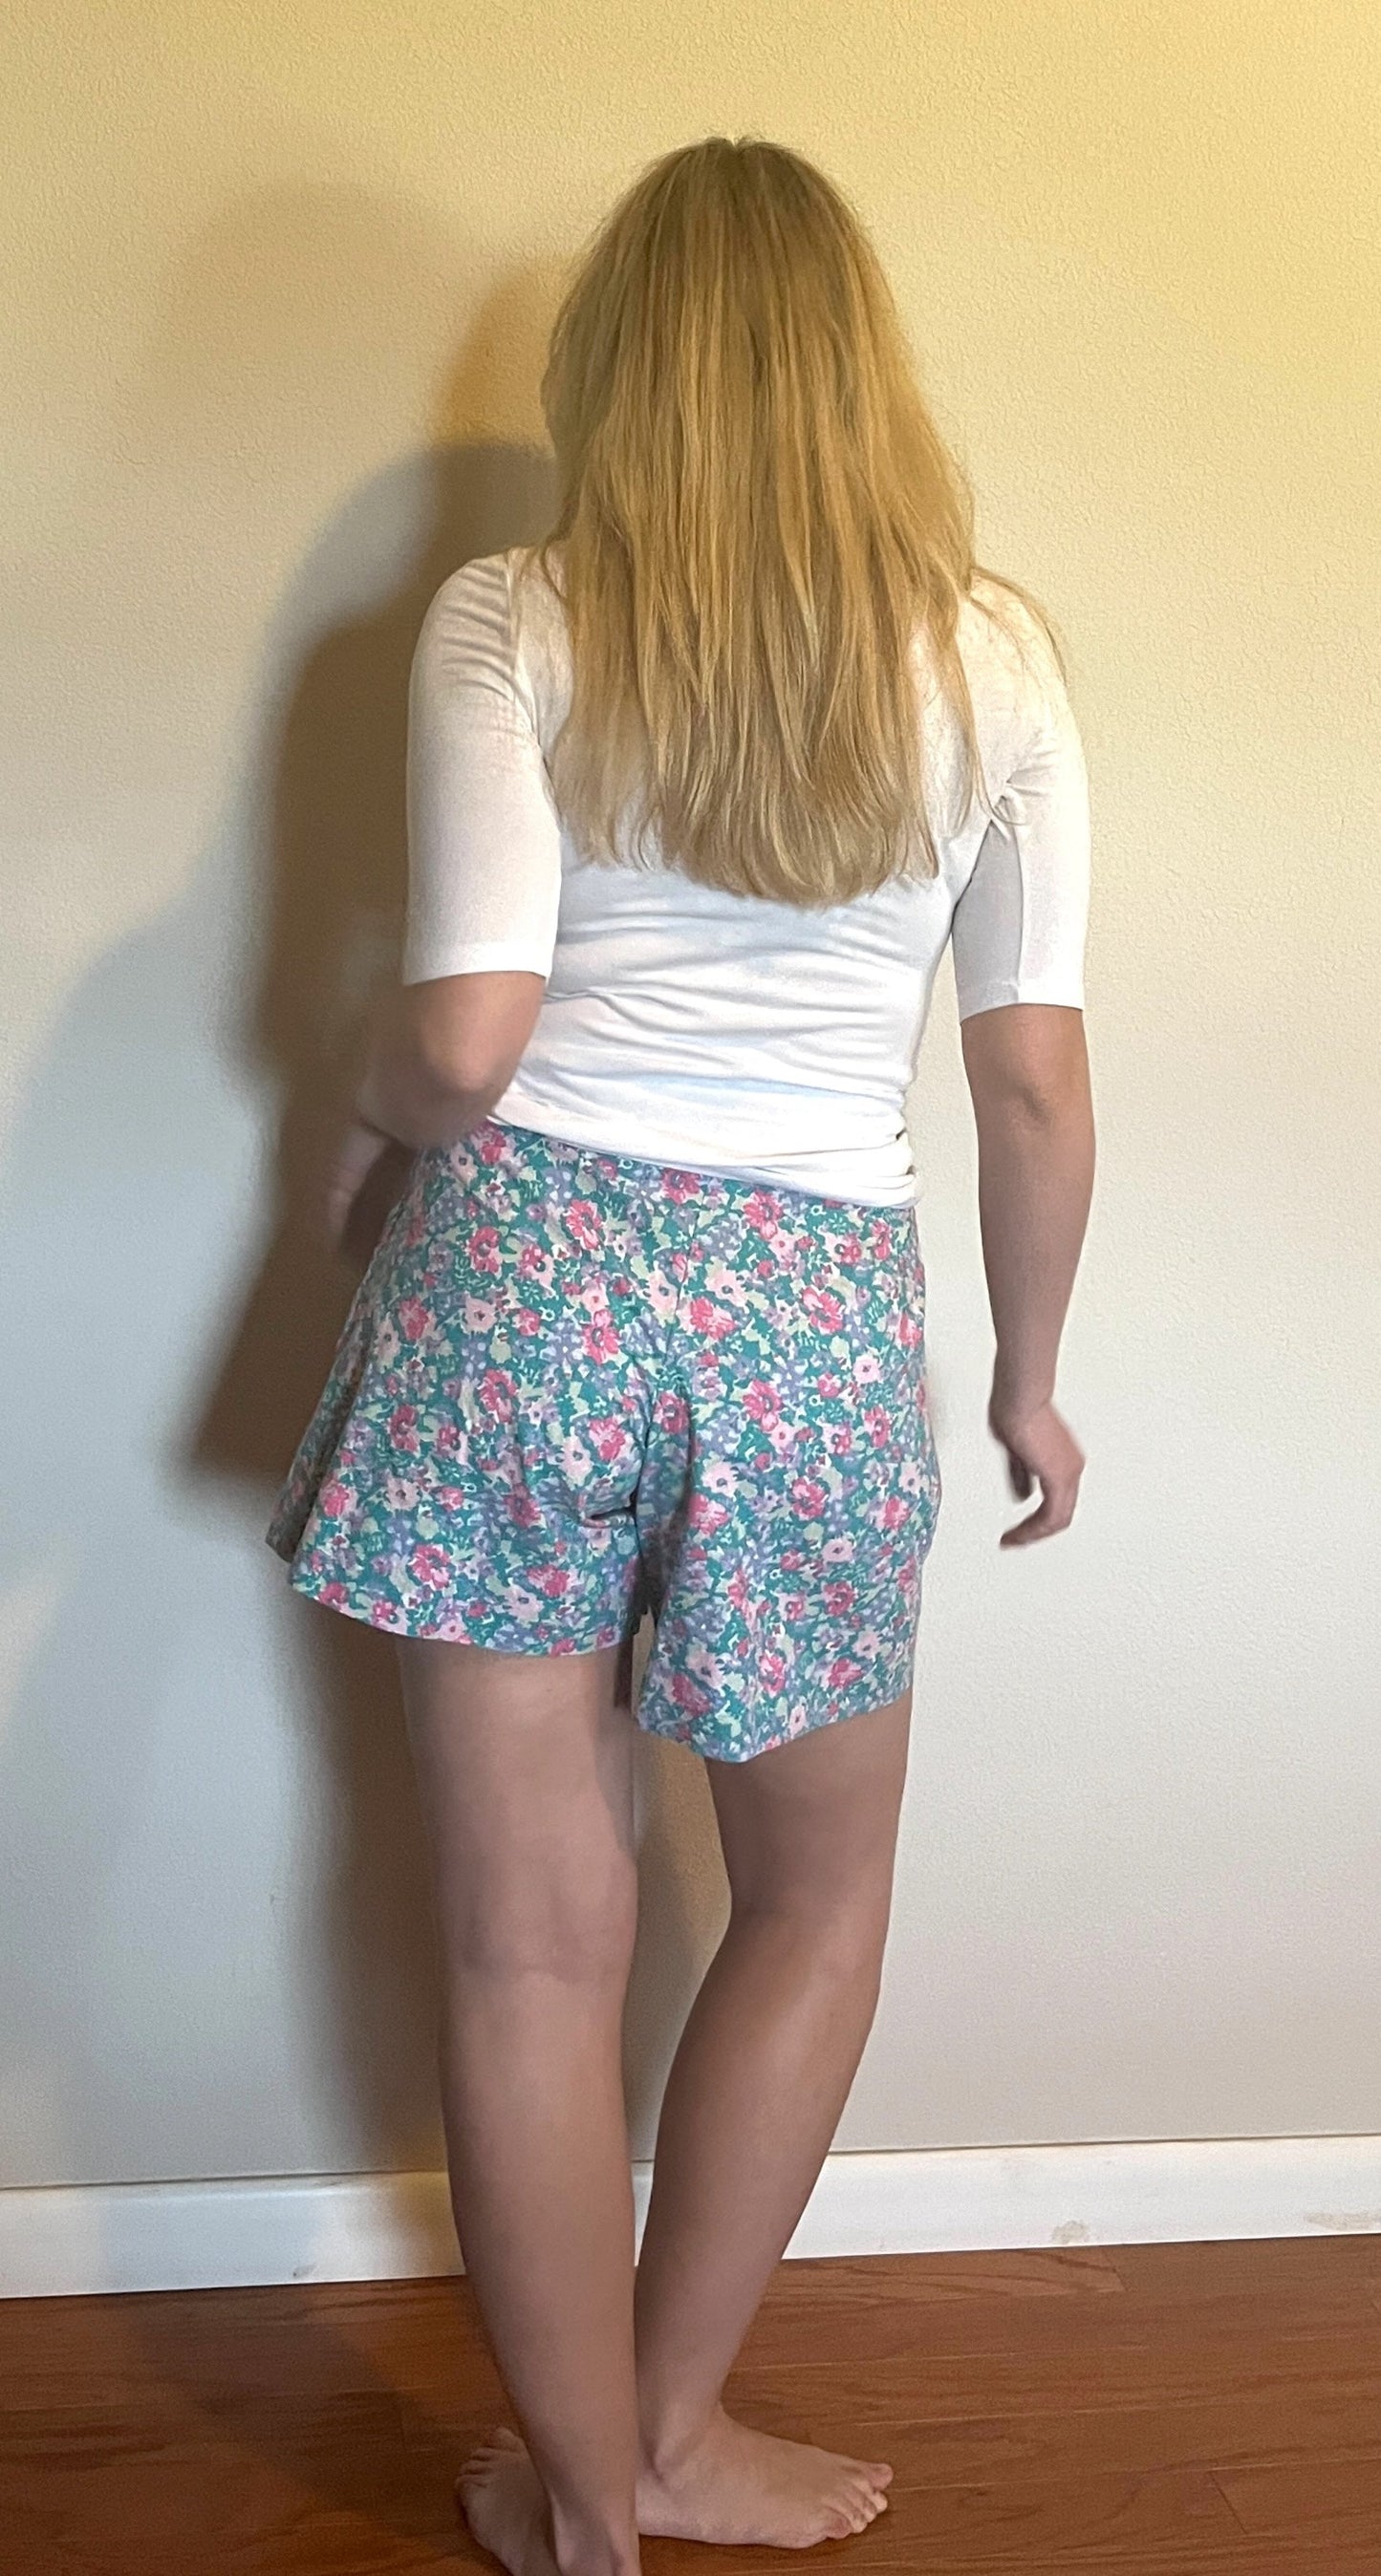 Vintage 1980's "Laura Ashley" Turquoise & Pink Floral Shorts